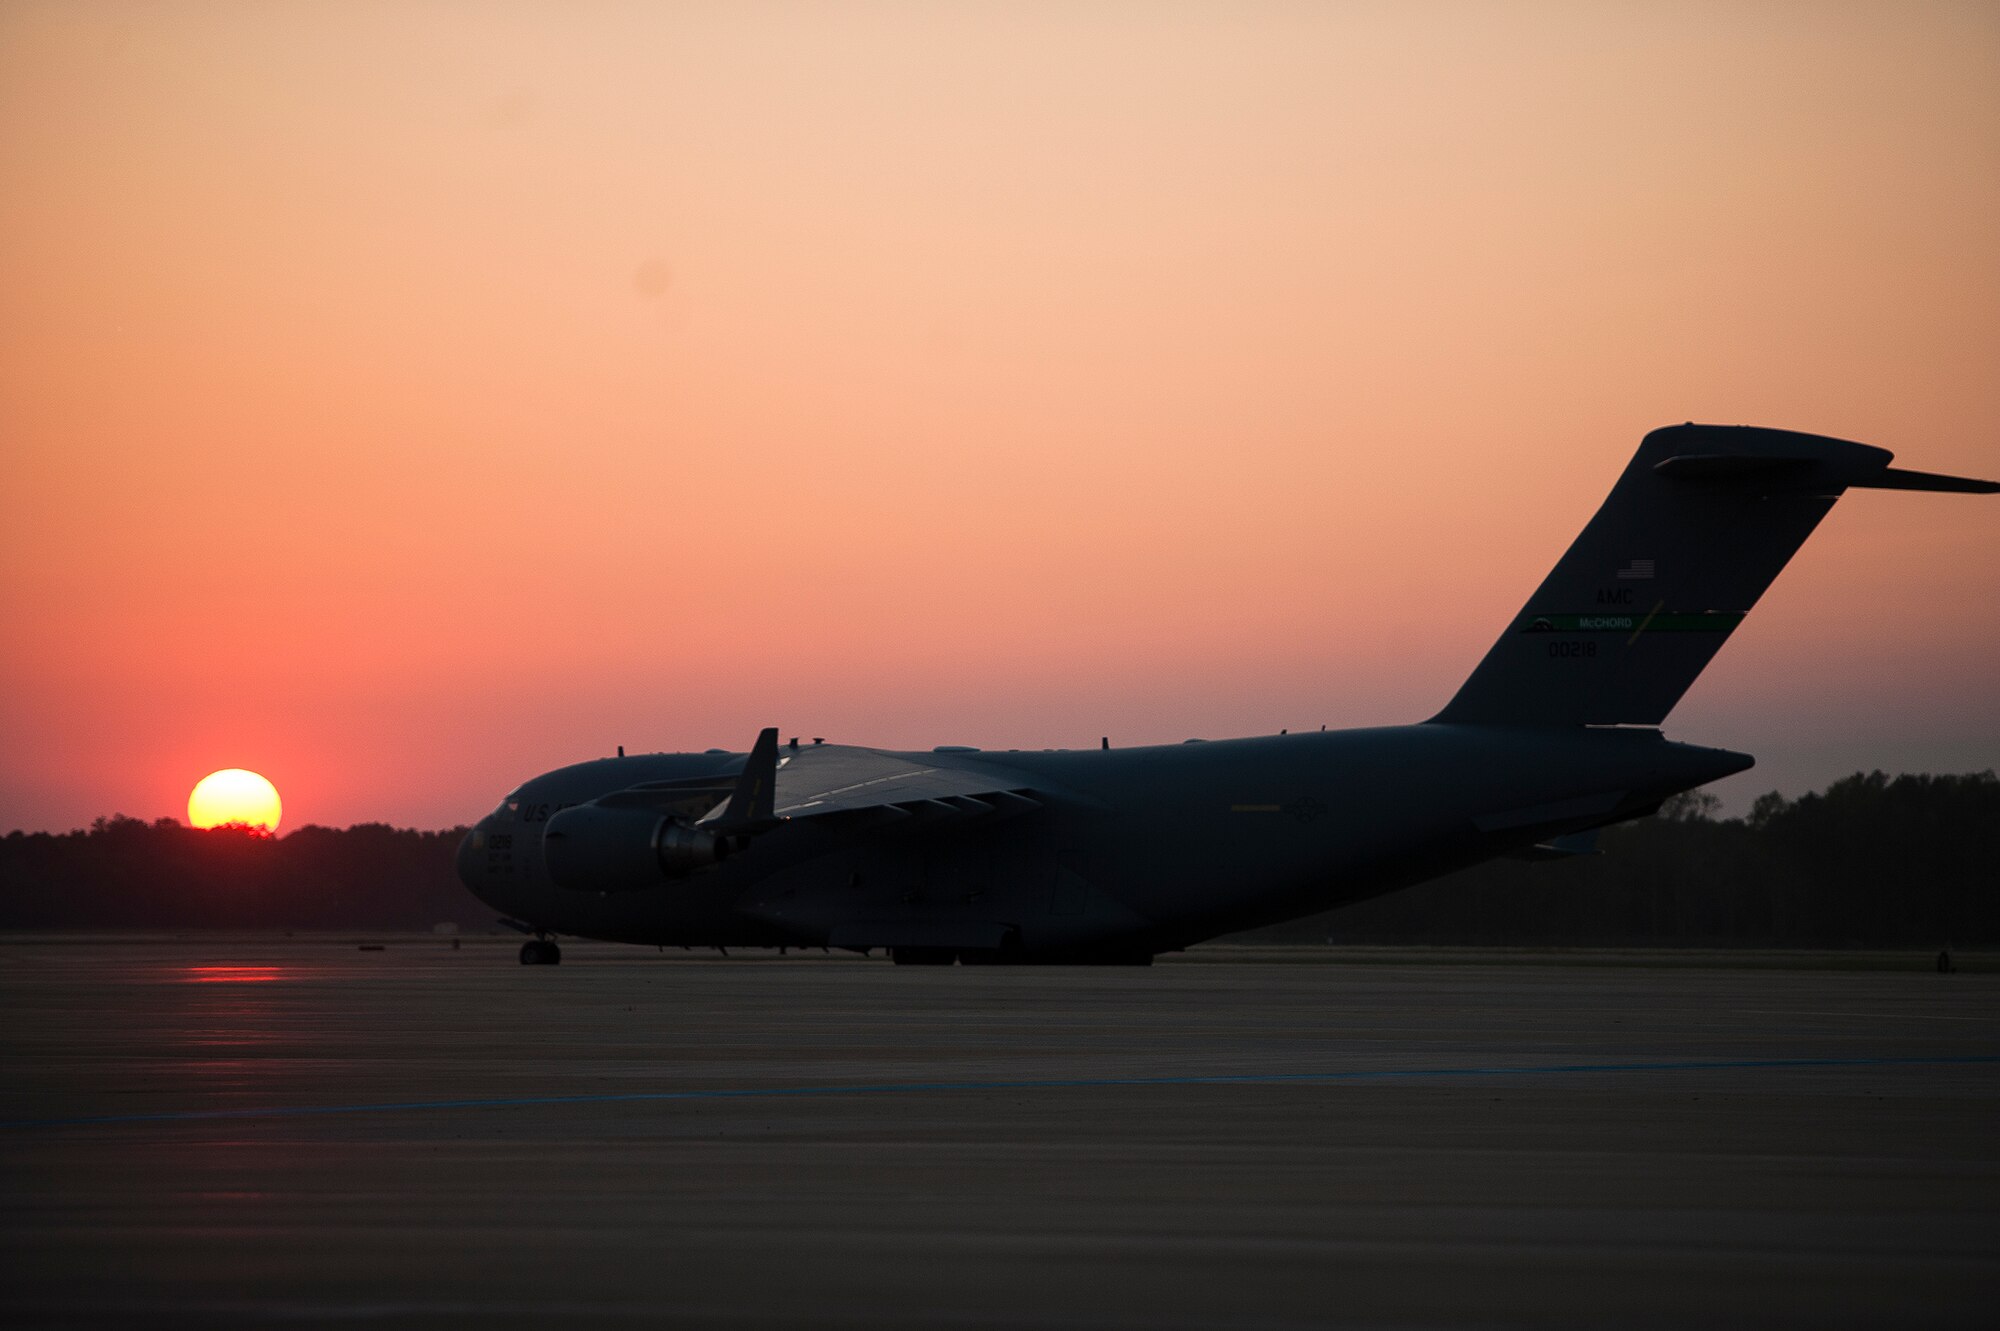 A C-17 Globemaster taxis Aug. 18, 2013, at Alexandria International Airport, La. The aircraft was participating in a personnel drop of 681 U.S. Army paratroopers during Joint Operational Access Exercise 13-0X. (U.S. Air Force photo by Staff Sgt. Russ Scalf)